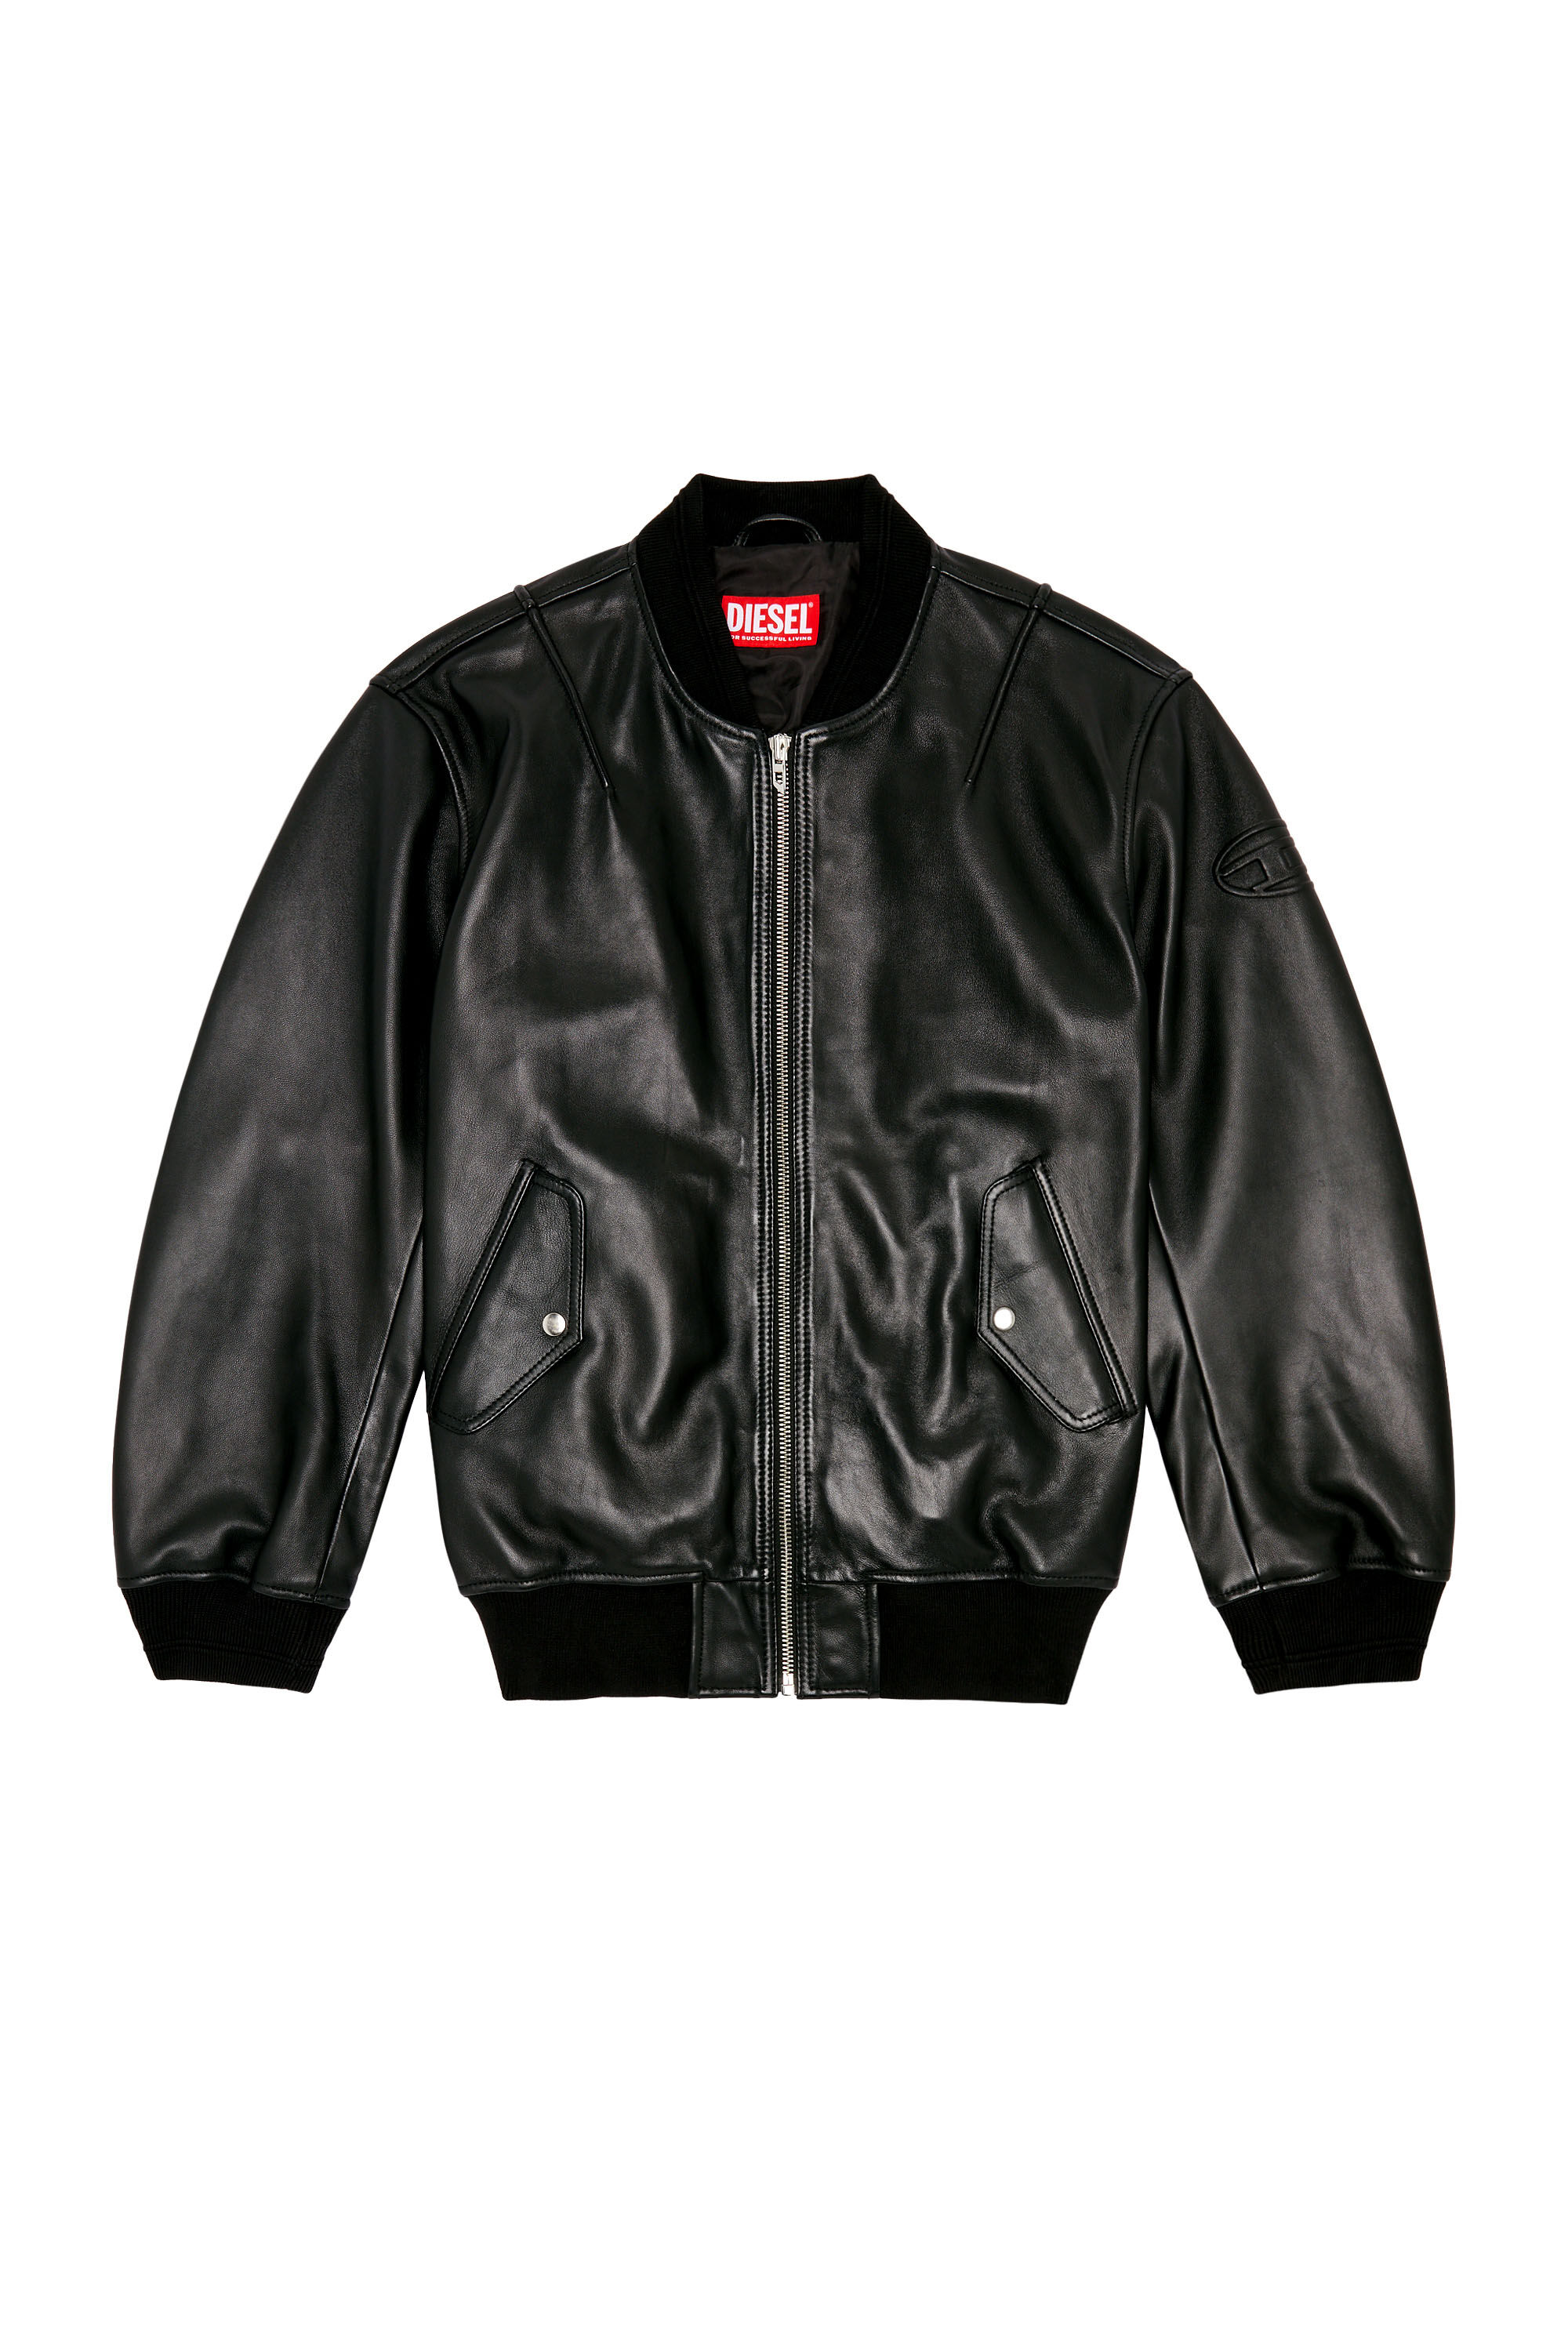 Men's Bomber jacket in tumbled leather | L-PRITTS-NEW Diesel